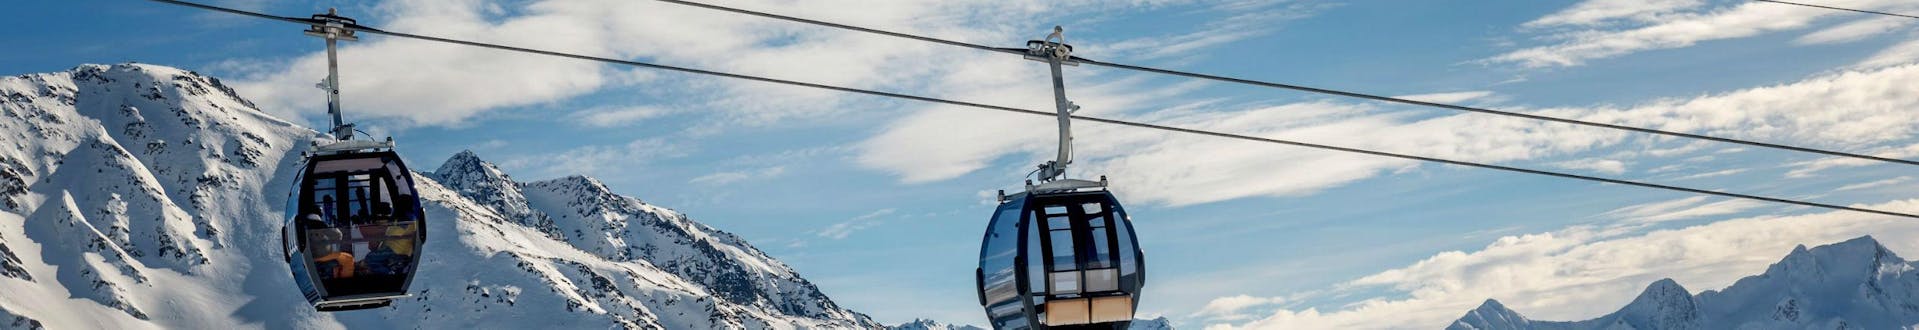 A view of the cable car carrying skiers up to the top of the mountain in the ski resort of Disentis, where local ski schools offer a selection of ski lessons.